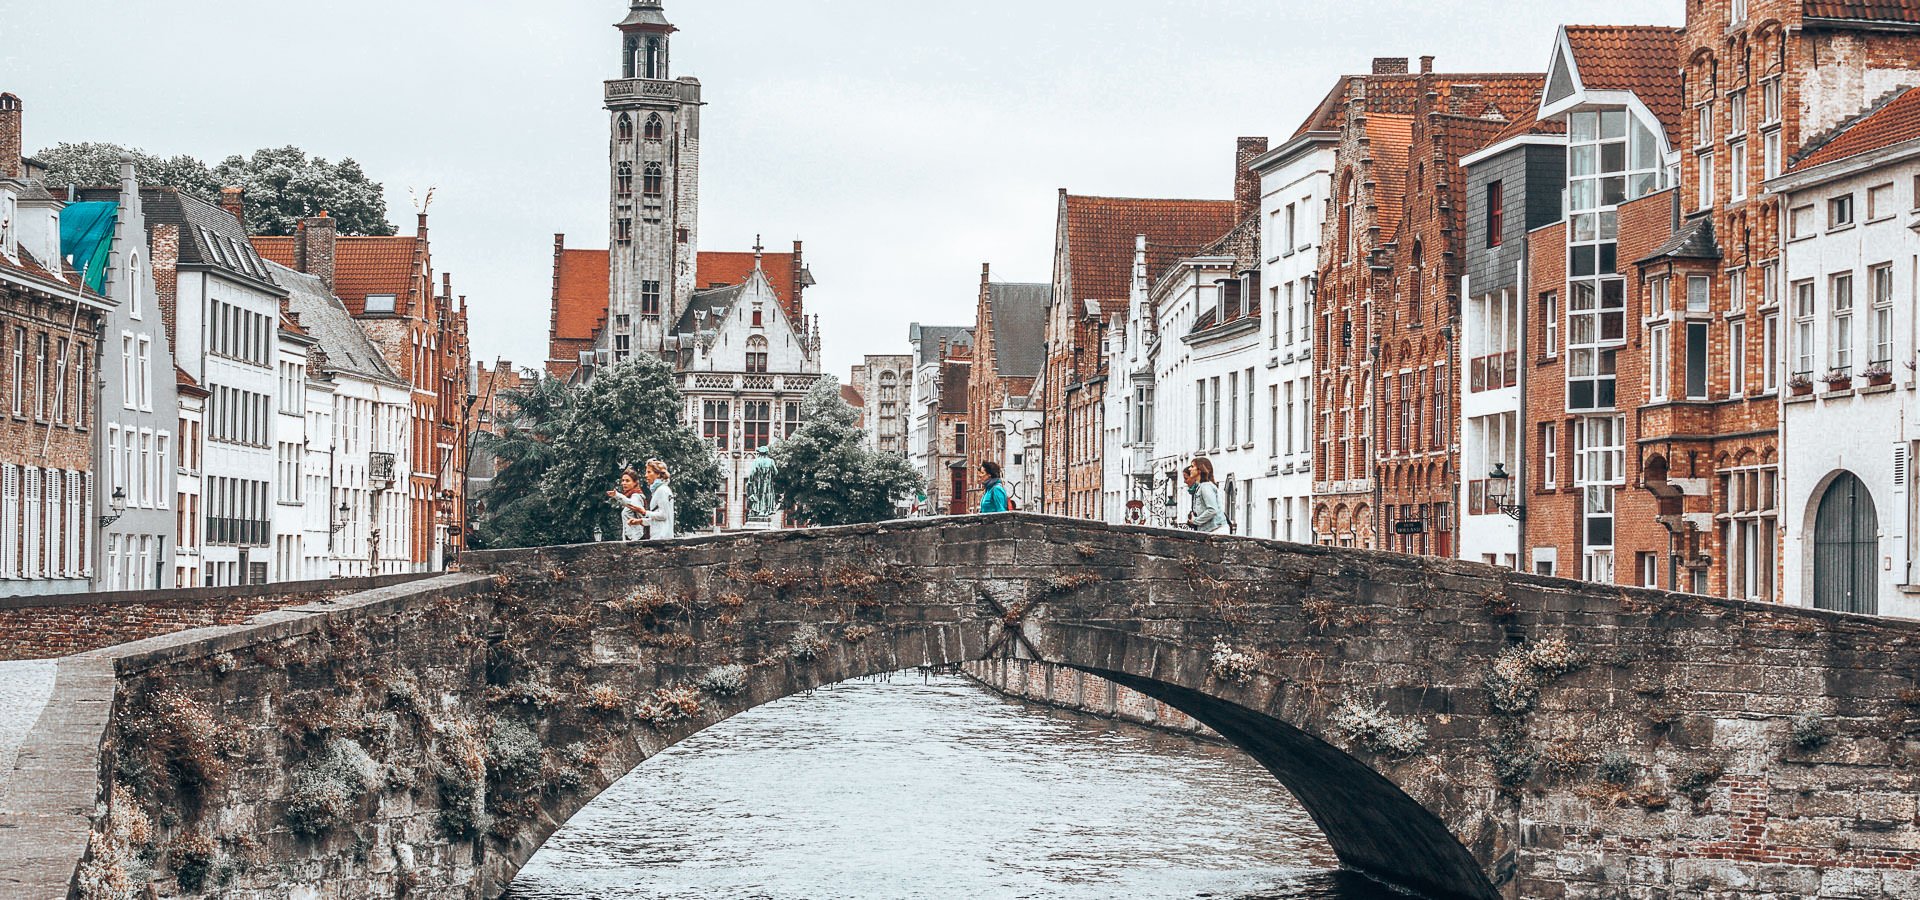 A Complete Guide To 24 Hours In Bruges | 24 hours in bruges 1